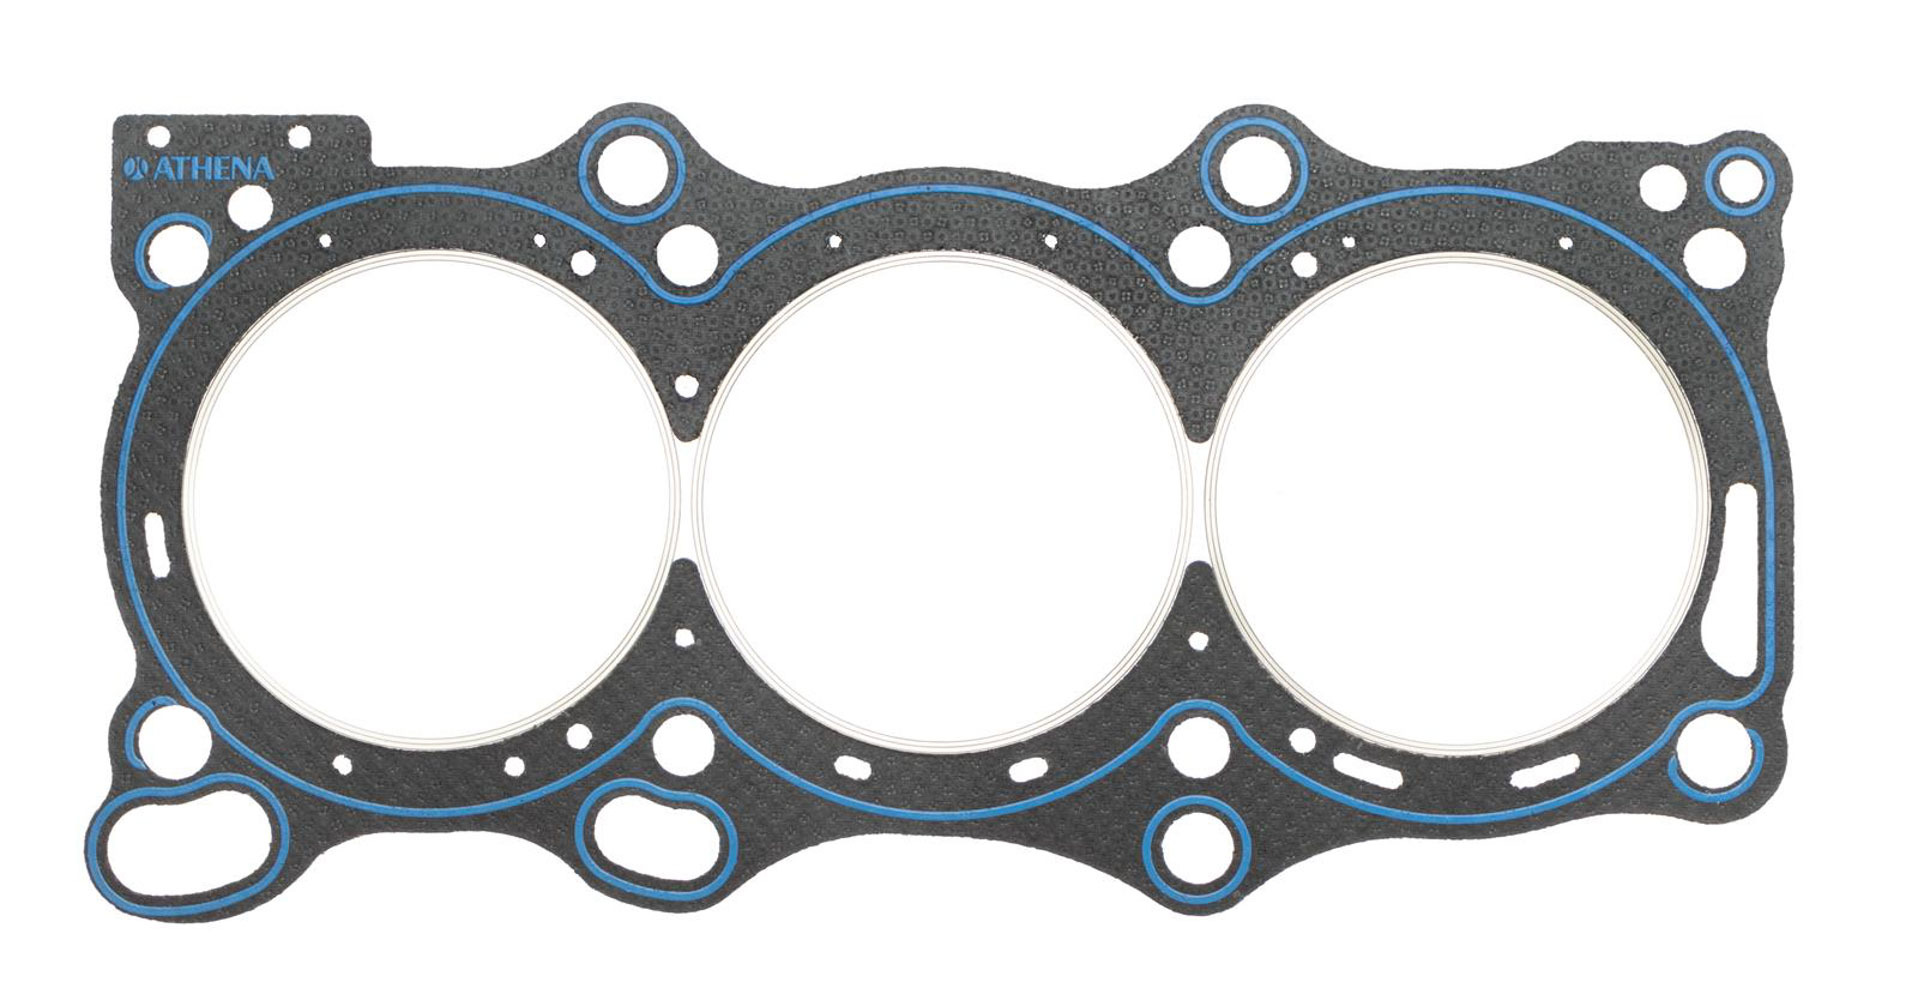 SCE Gaskets CR330067L - Cylinder Head Gasket, Vulcan Cut Ring, 100.50 mm Bore, 1.00 mm Compression Thickness, Steel Core Laminate, Driver Side, Nissan V6, Each